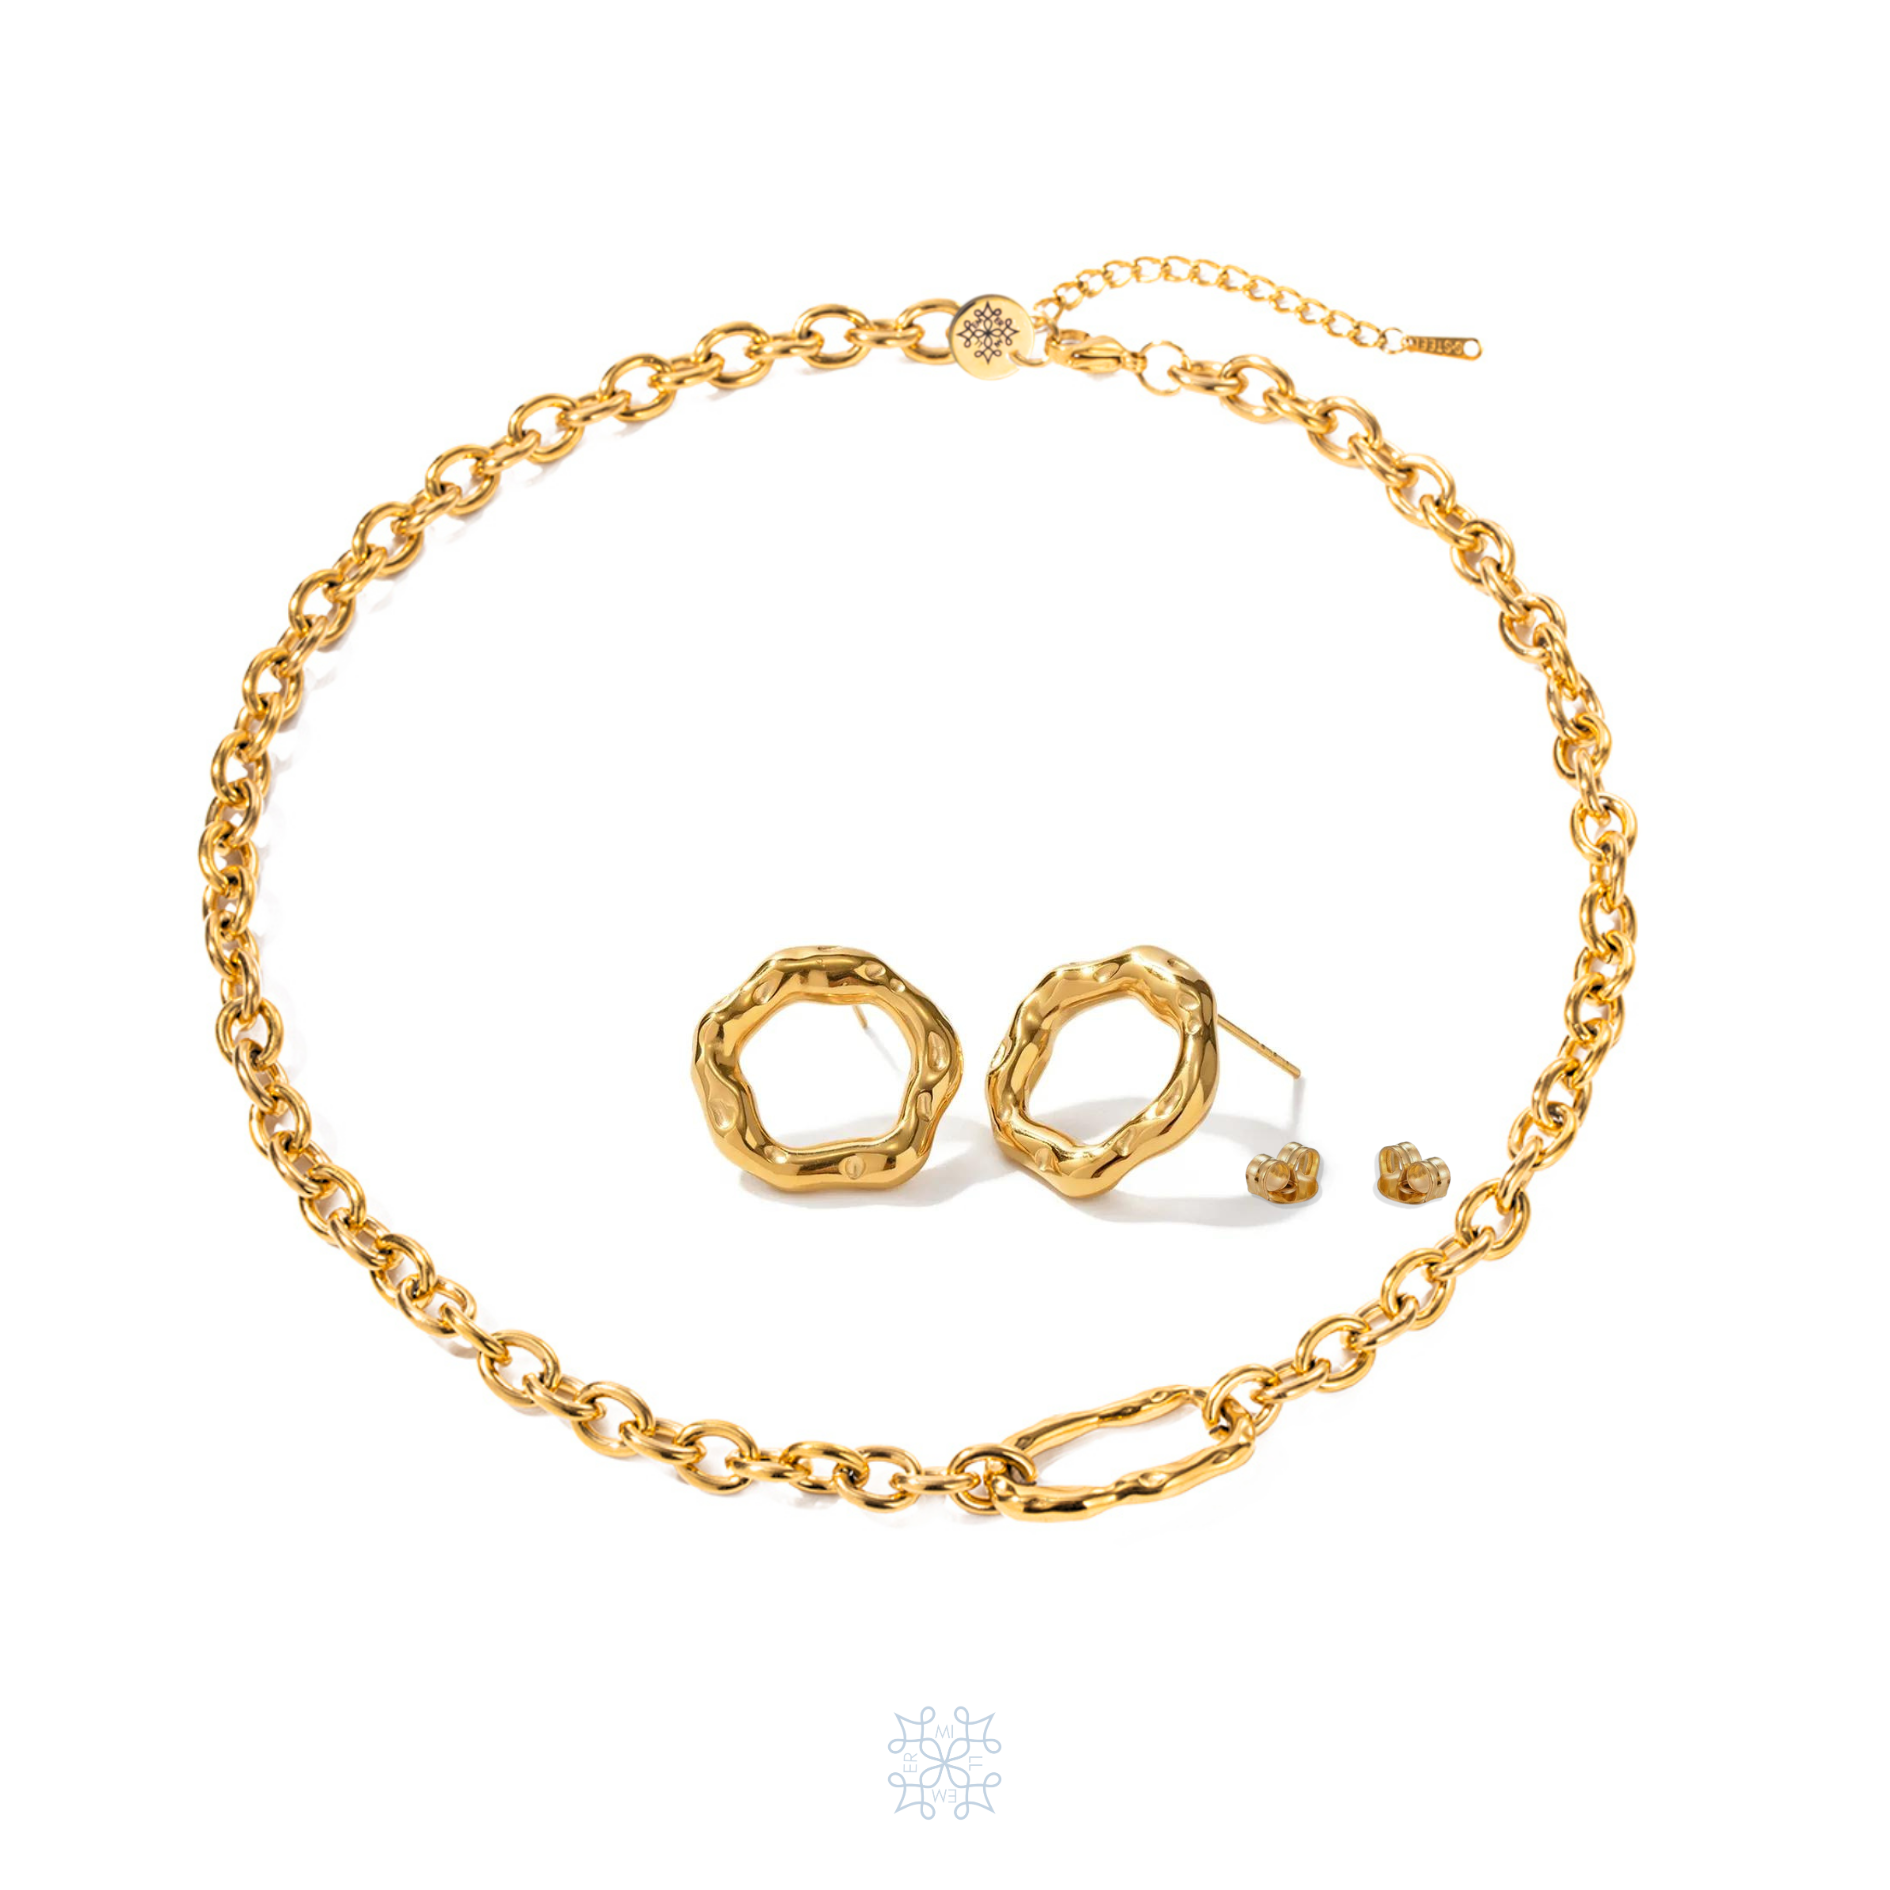 DUNE Gold Set. The set has a pair of gold hoop earrings and a chain necklace. The shape of the hopps is irregular and is inspired by eaterdrops on sand dunes. The same detail is in the side of gold chain necklace.